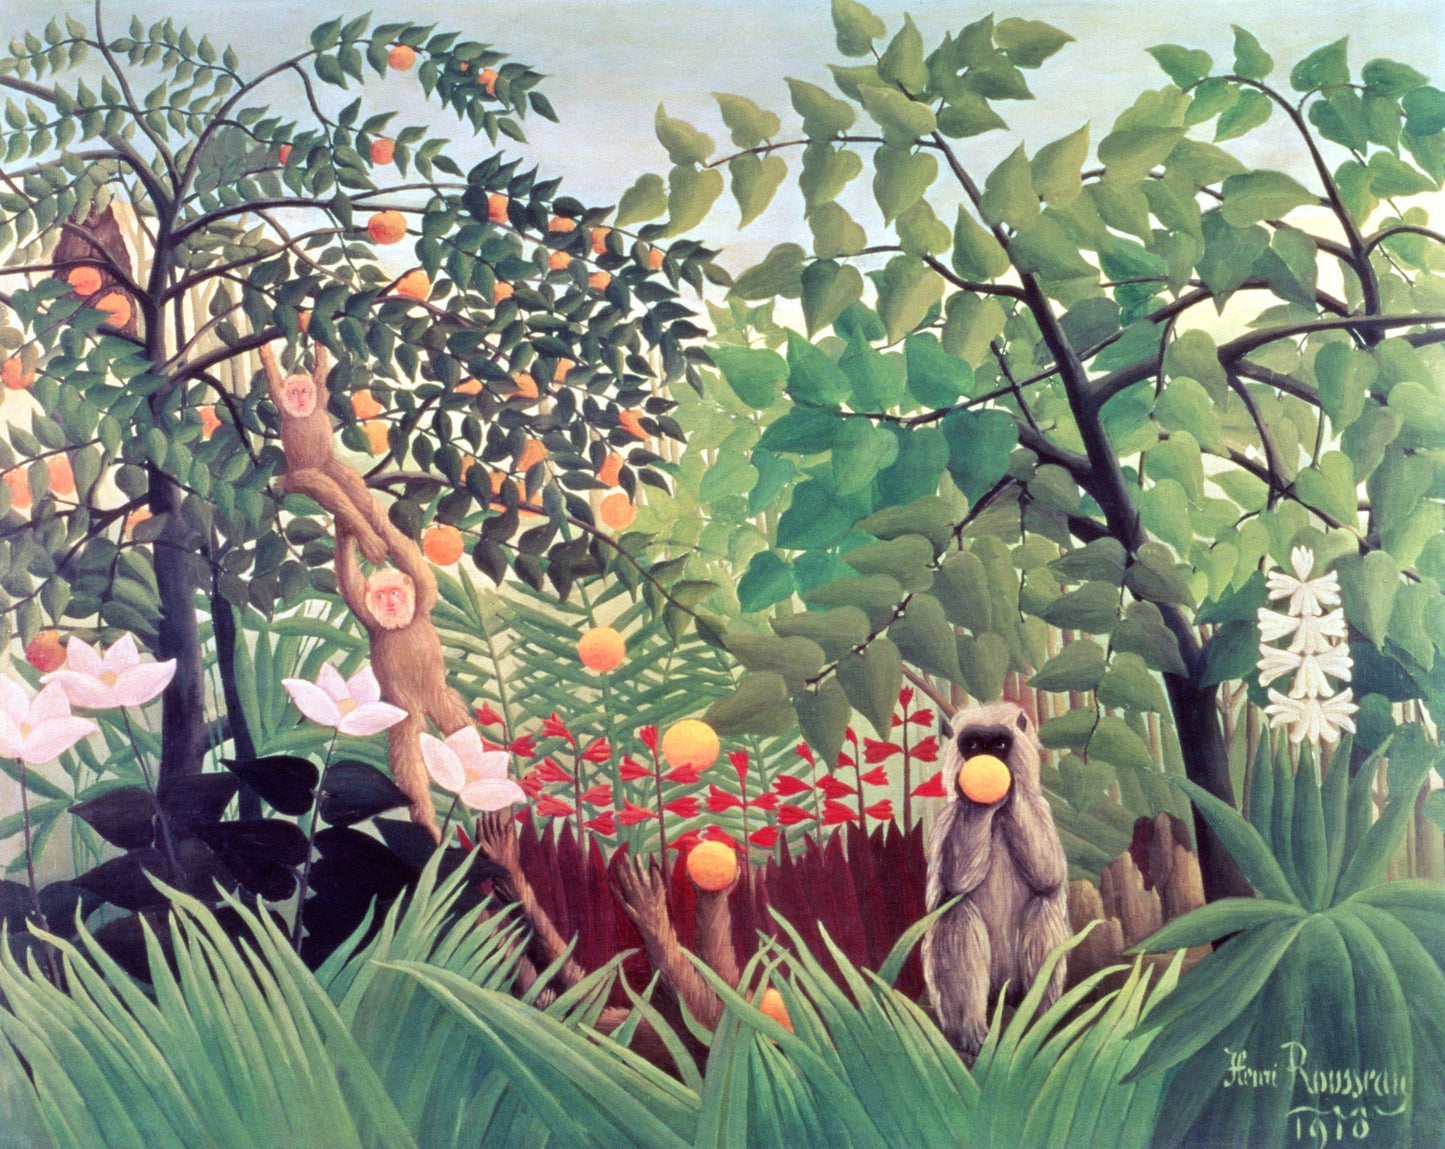 Exotic Landscape by Henri Rousseau Poster Illustration Print Wall Hanging Decor A4 A3 A2